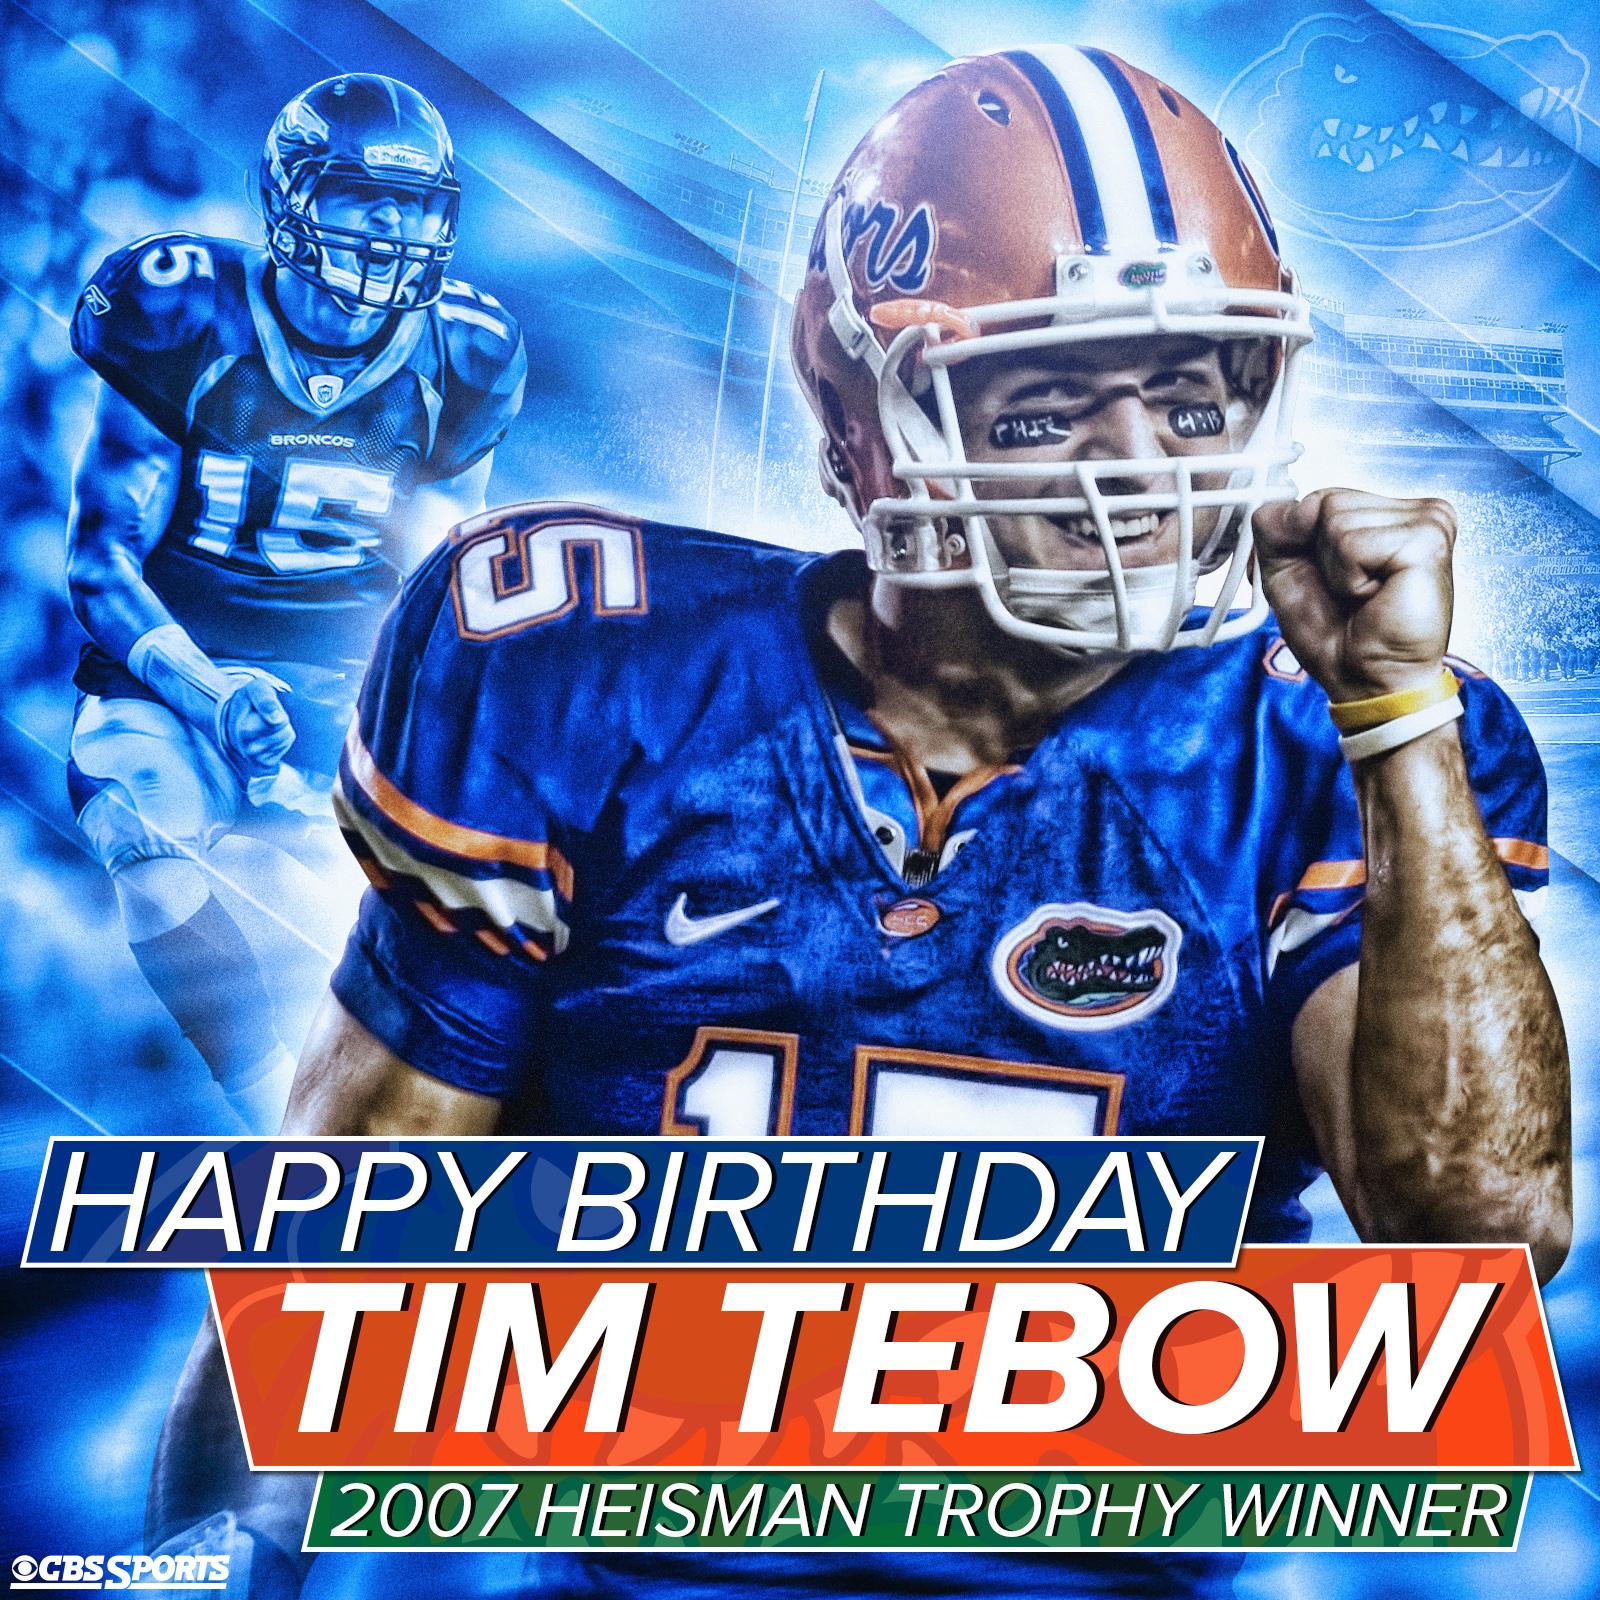 Happy Birthday to the one and only, Tim Tebow. 